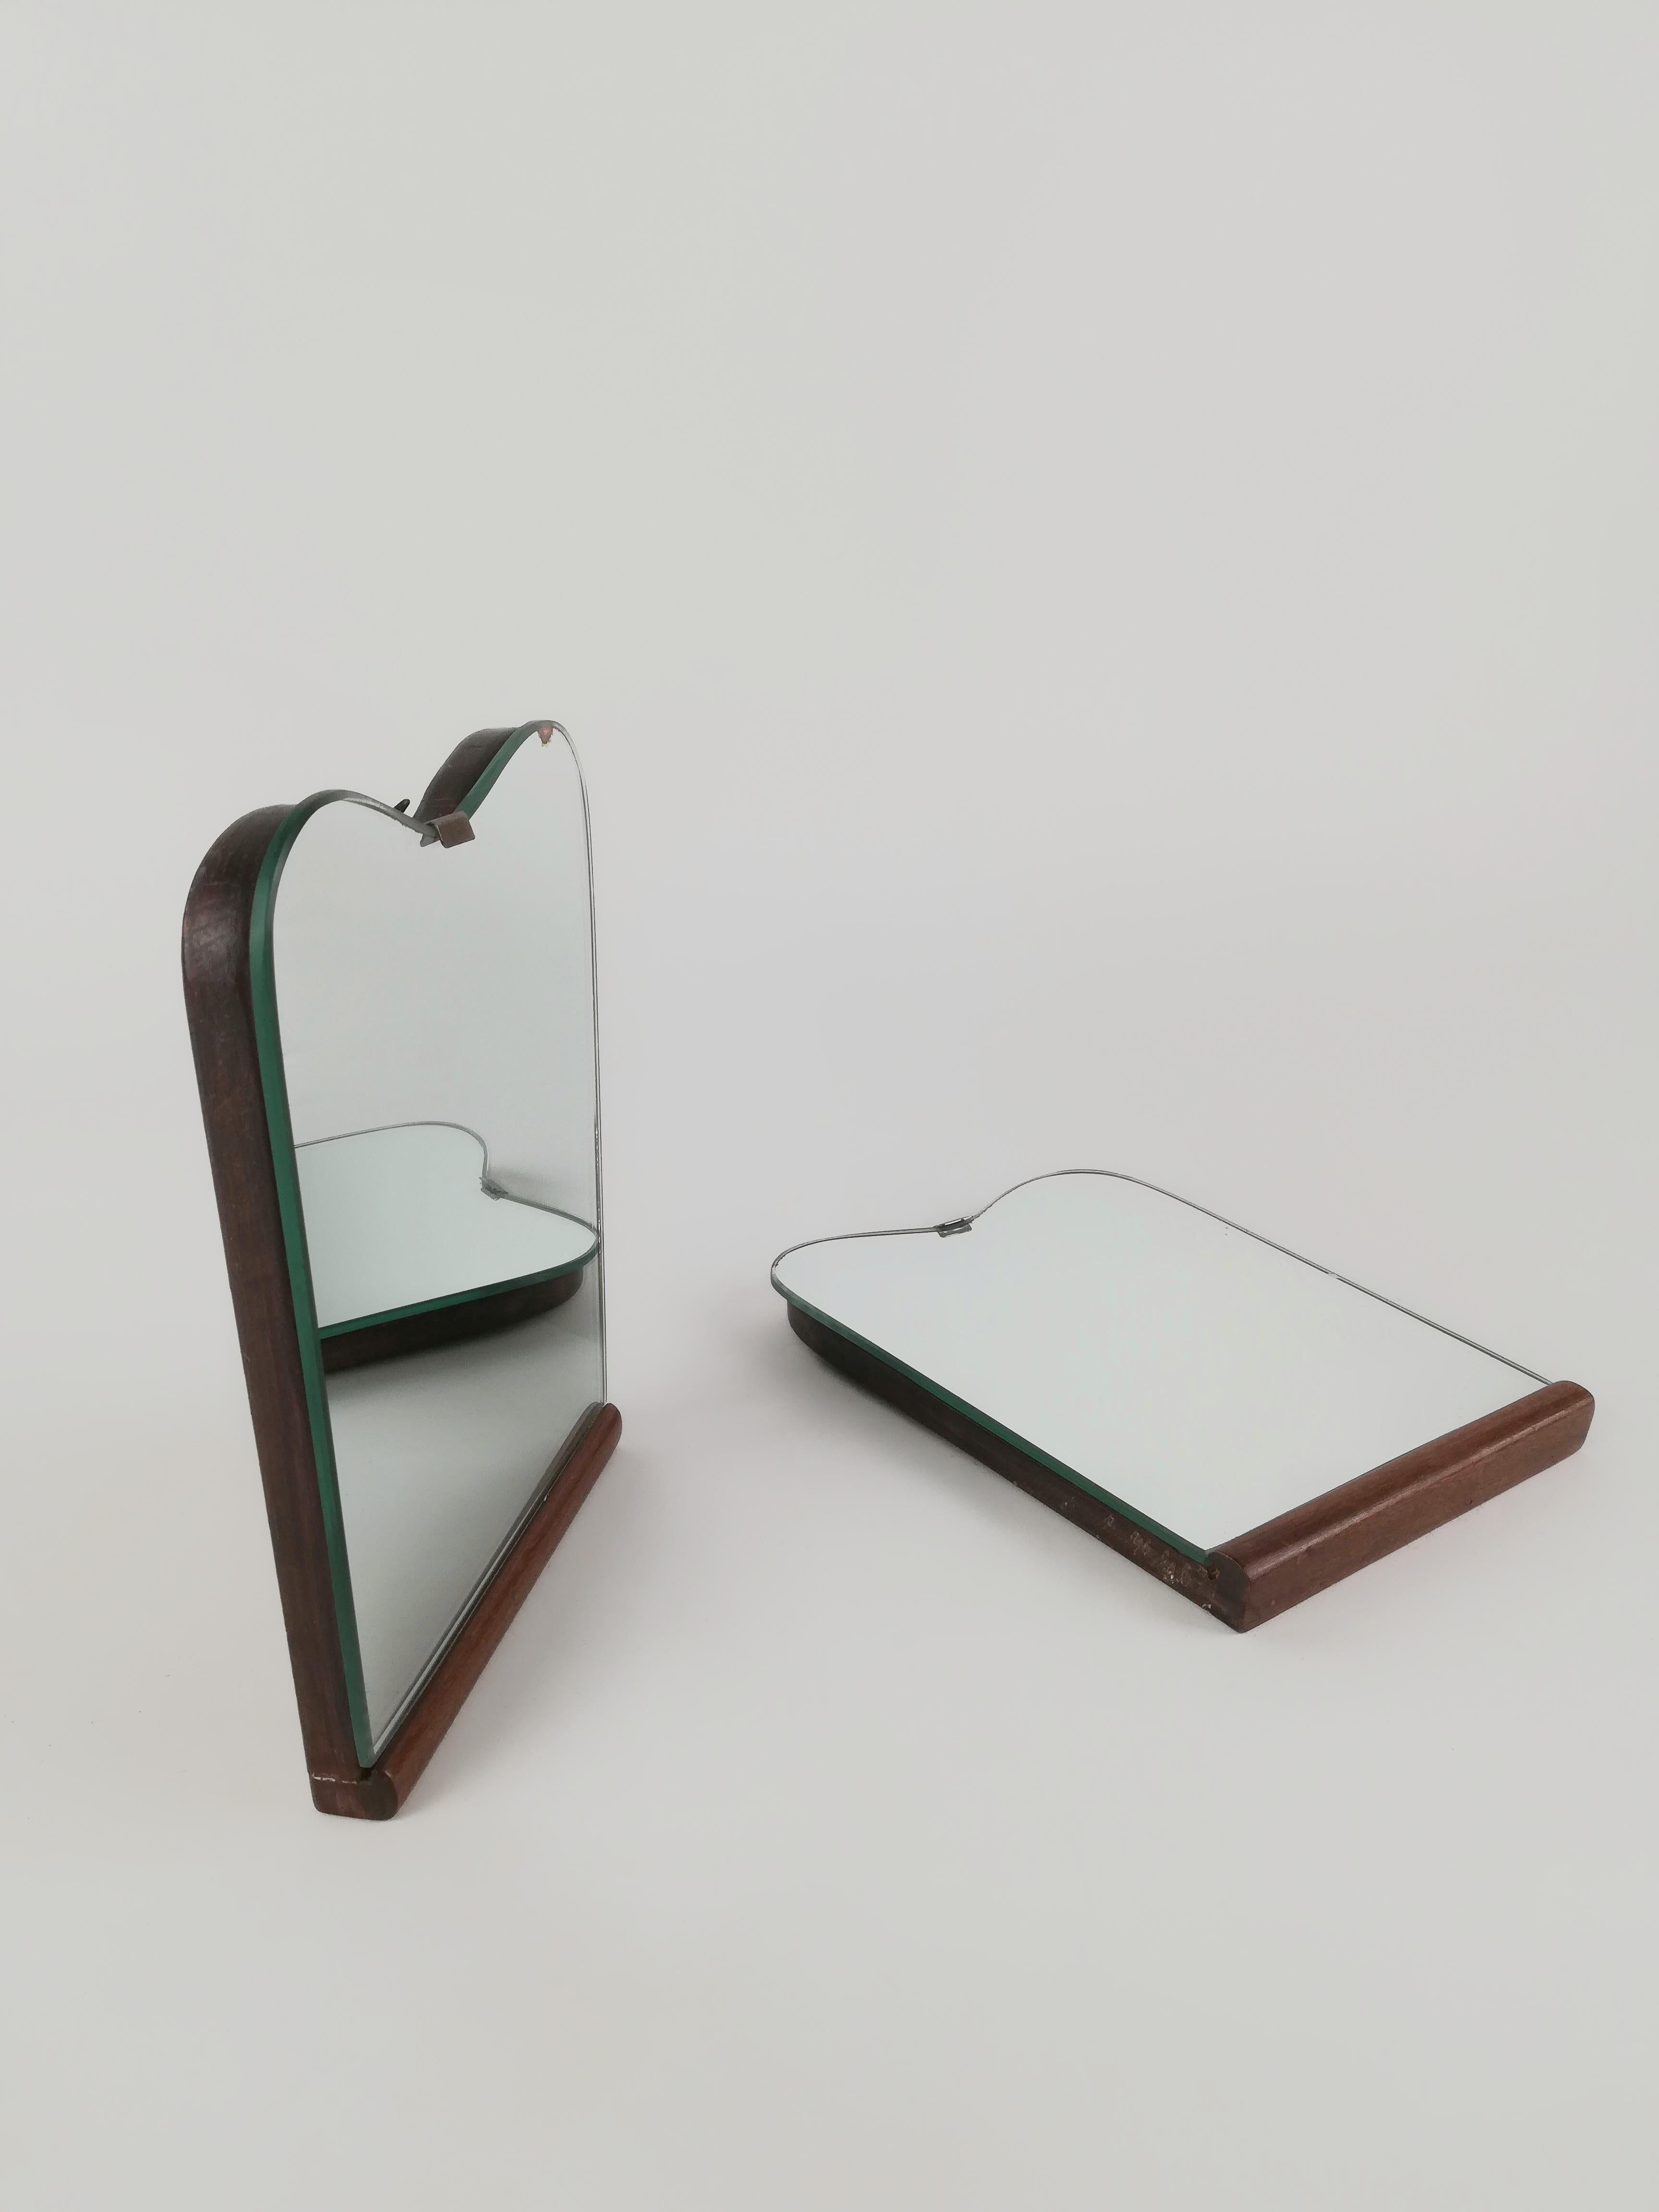 A rare couple of vintage mirror, datable between the 1930s and 1950s of the 20th century.
They were made in Italy and probably, this pair of twin wall mirrors, were positioned above 2 bedside tables.
The mirrors are supported by two frames in